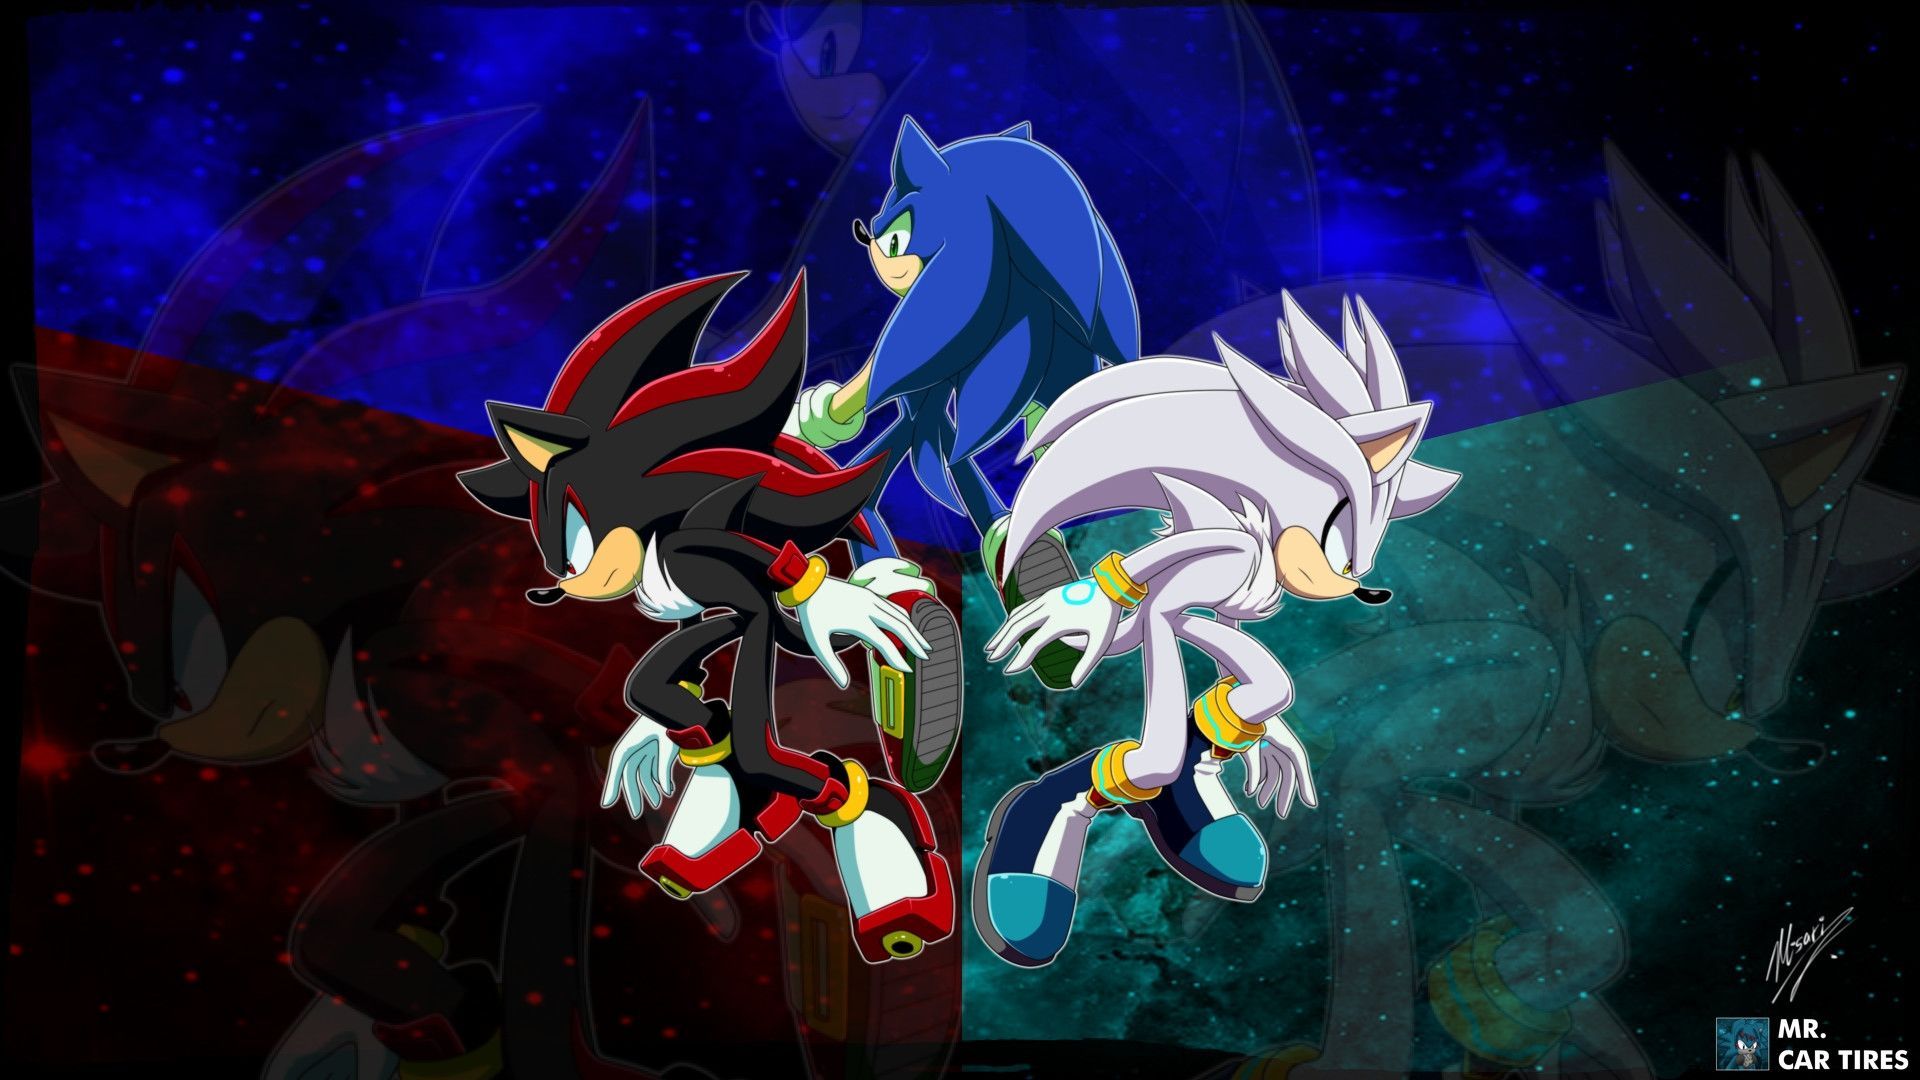 Sonic And Shadow Wallpaper 75 Image inside Sonic Silver And Shadow Wallpaper. Shadow the hedgehog, Sonic and shadow, Hedgehog